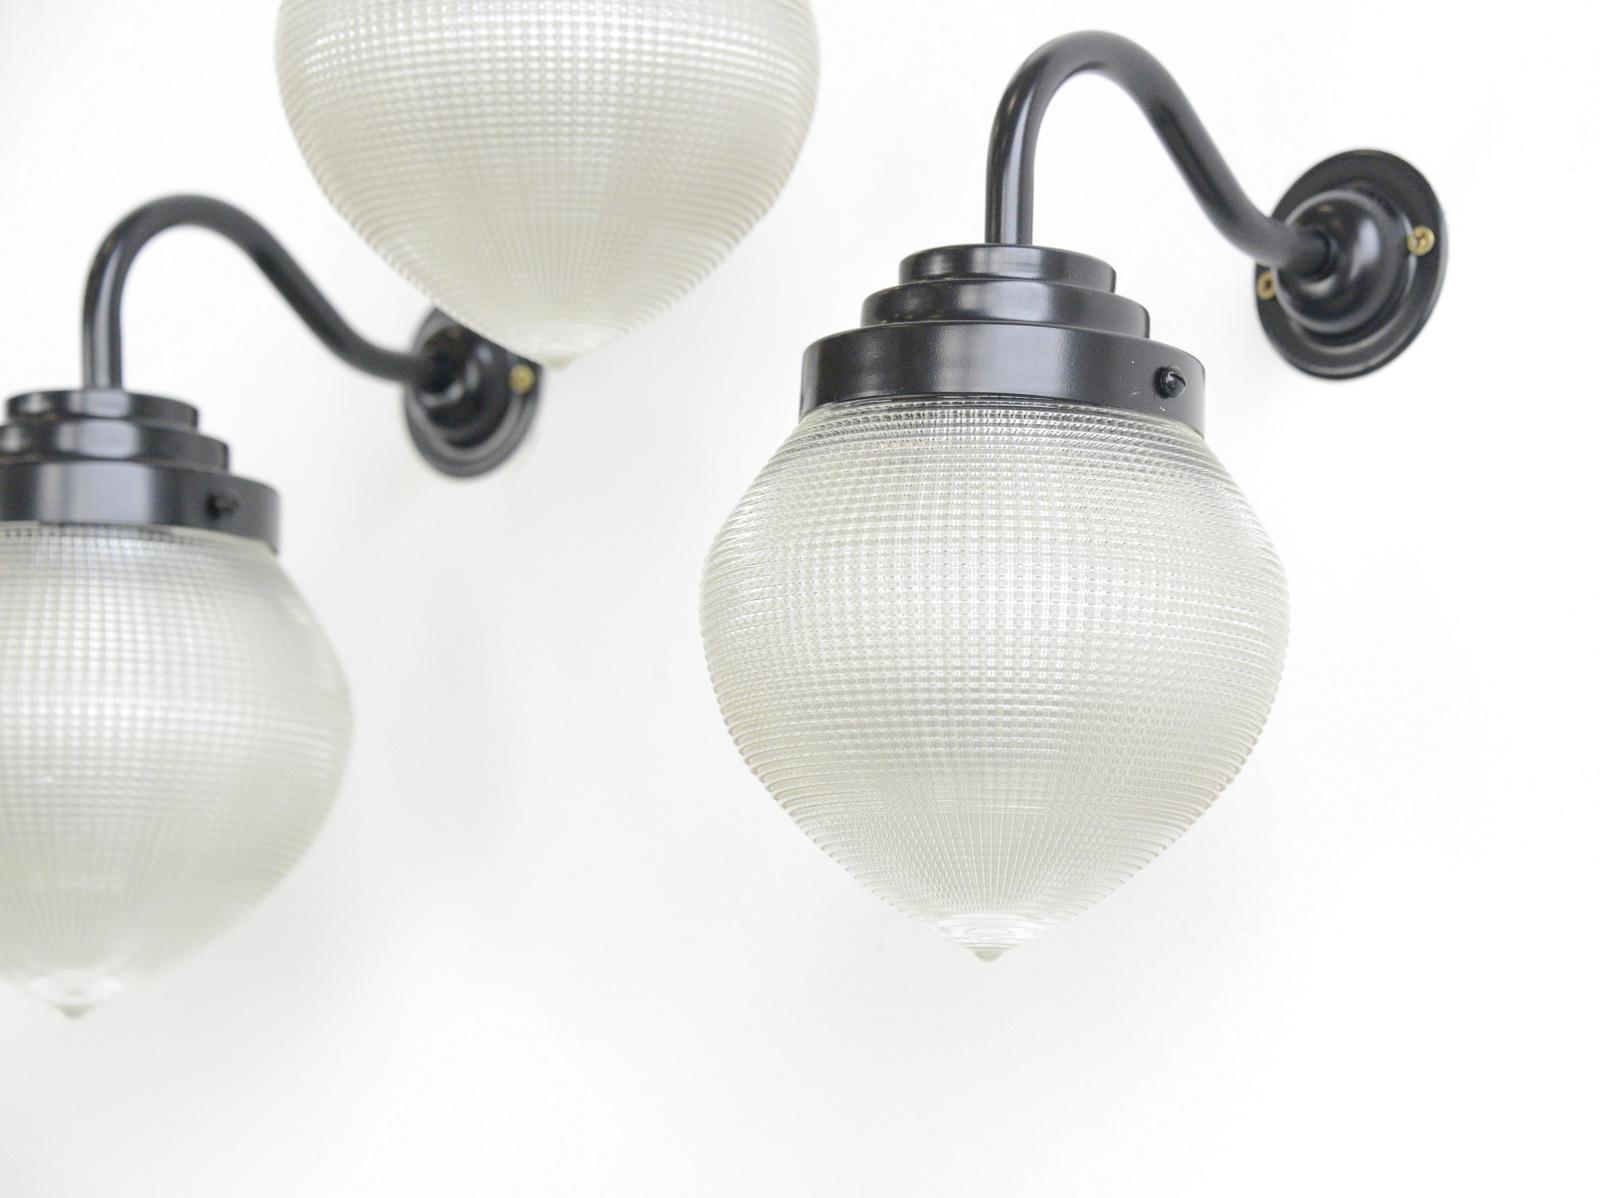 Holophane globe wall lights, circa 1920s

- Price is per light
- Teardrop prismatic glass shades
- Curved satin black steel arm
- Takes E27 fitting bulbs
- Marked Holophane, USA
- American, 1920s
- Measures: 16cm wide x 25cm deep x 22cm